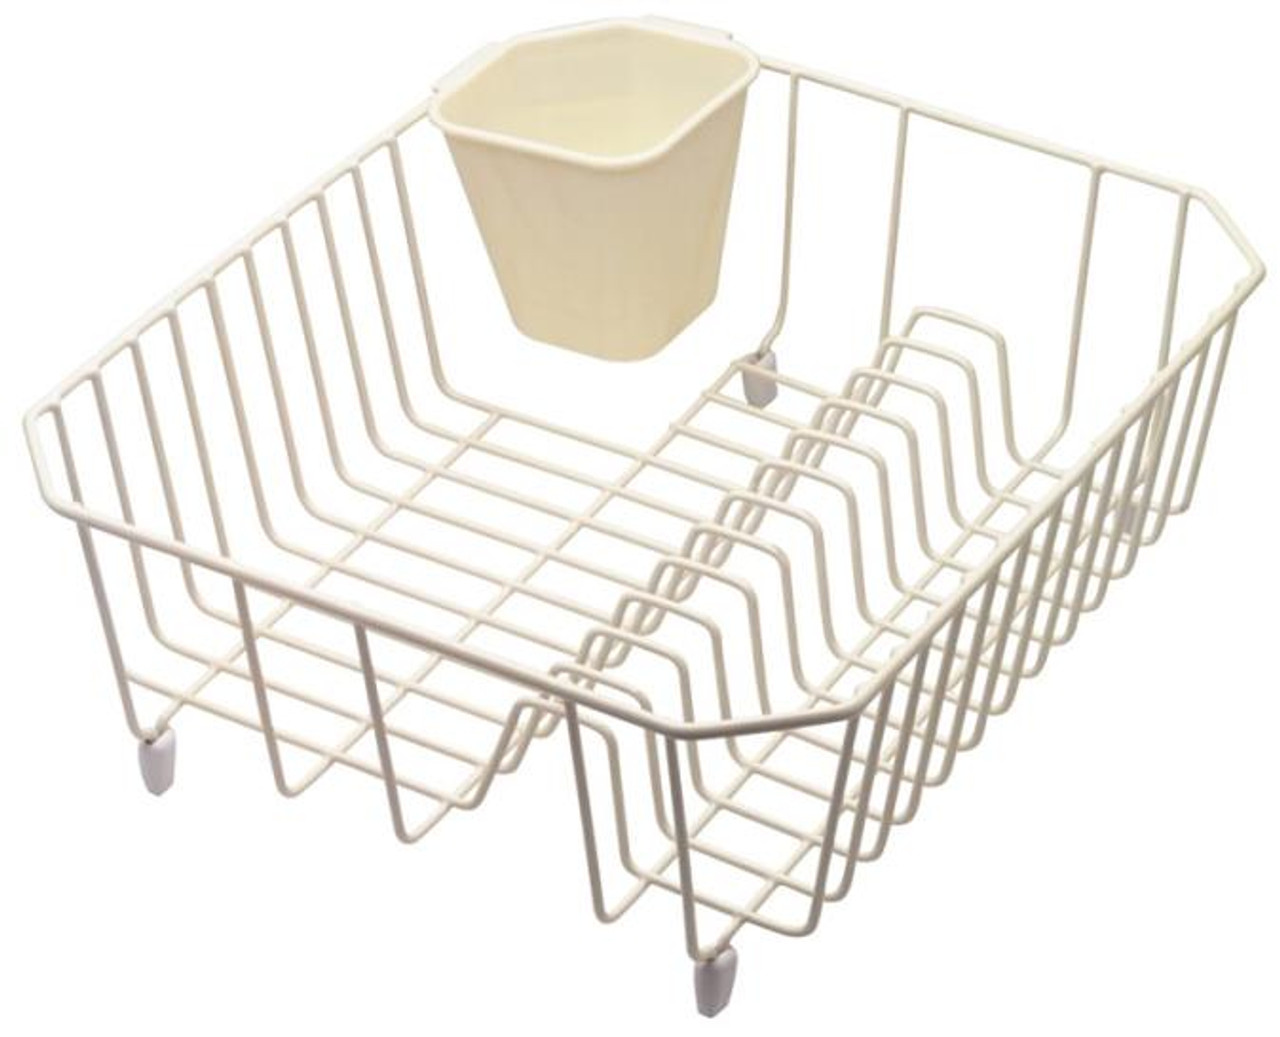 Dish Drainer Rack- 14.31 x 12.49 x 5.39- Bisque - Surry General Store